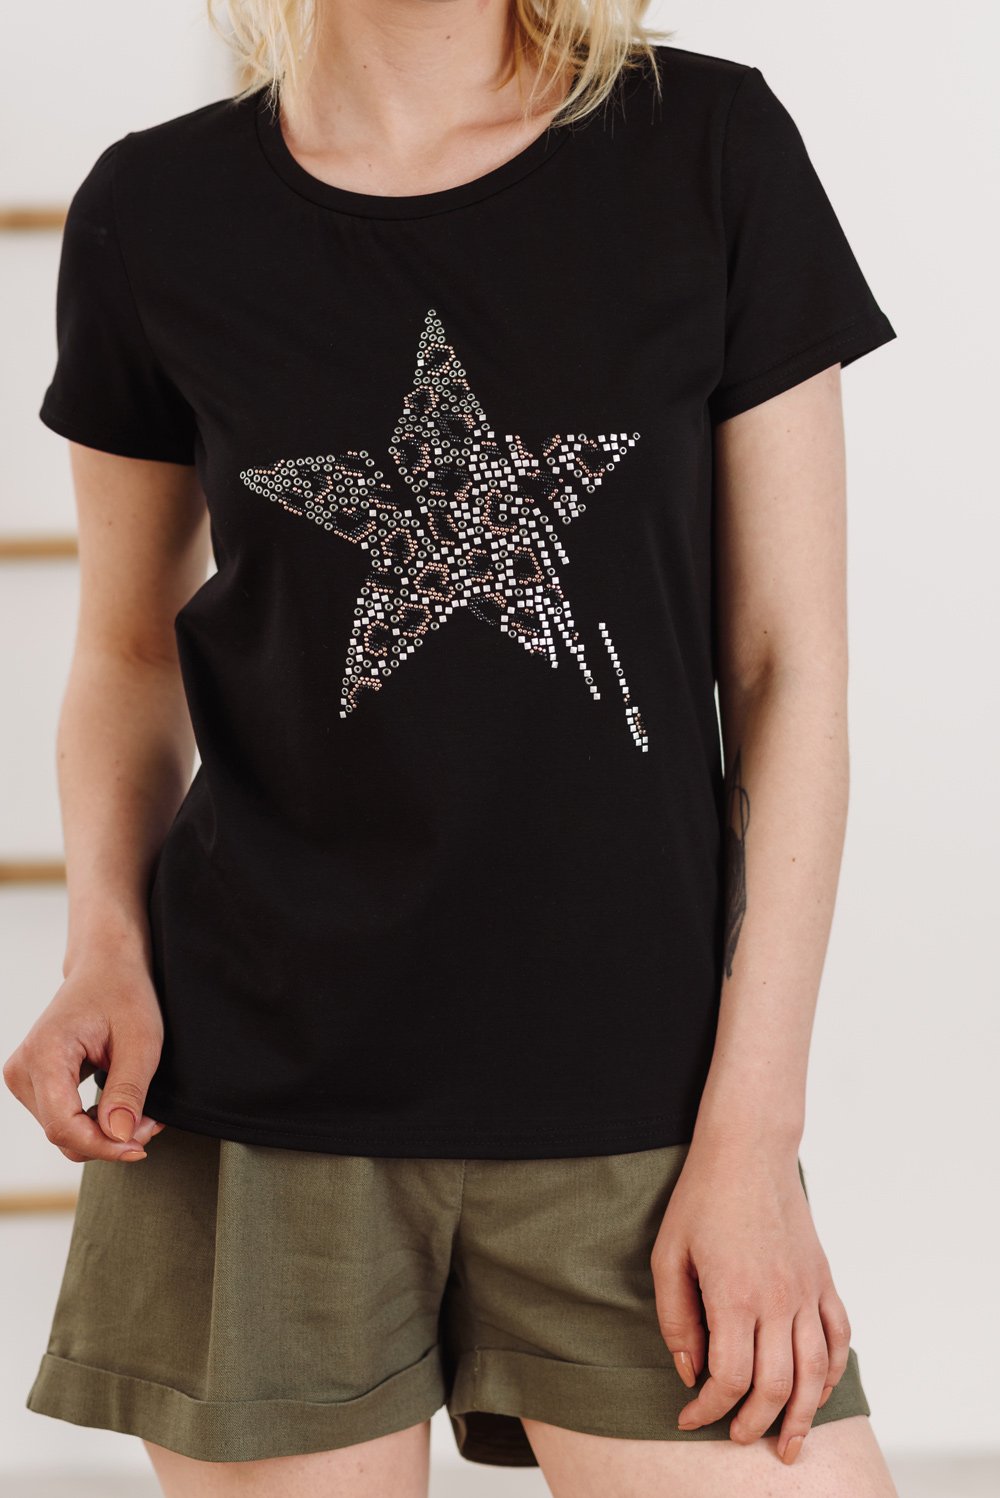 Black T-shirt with a tracery